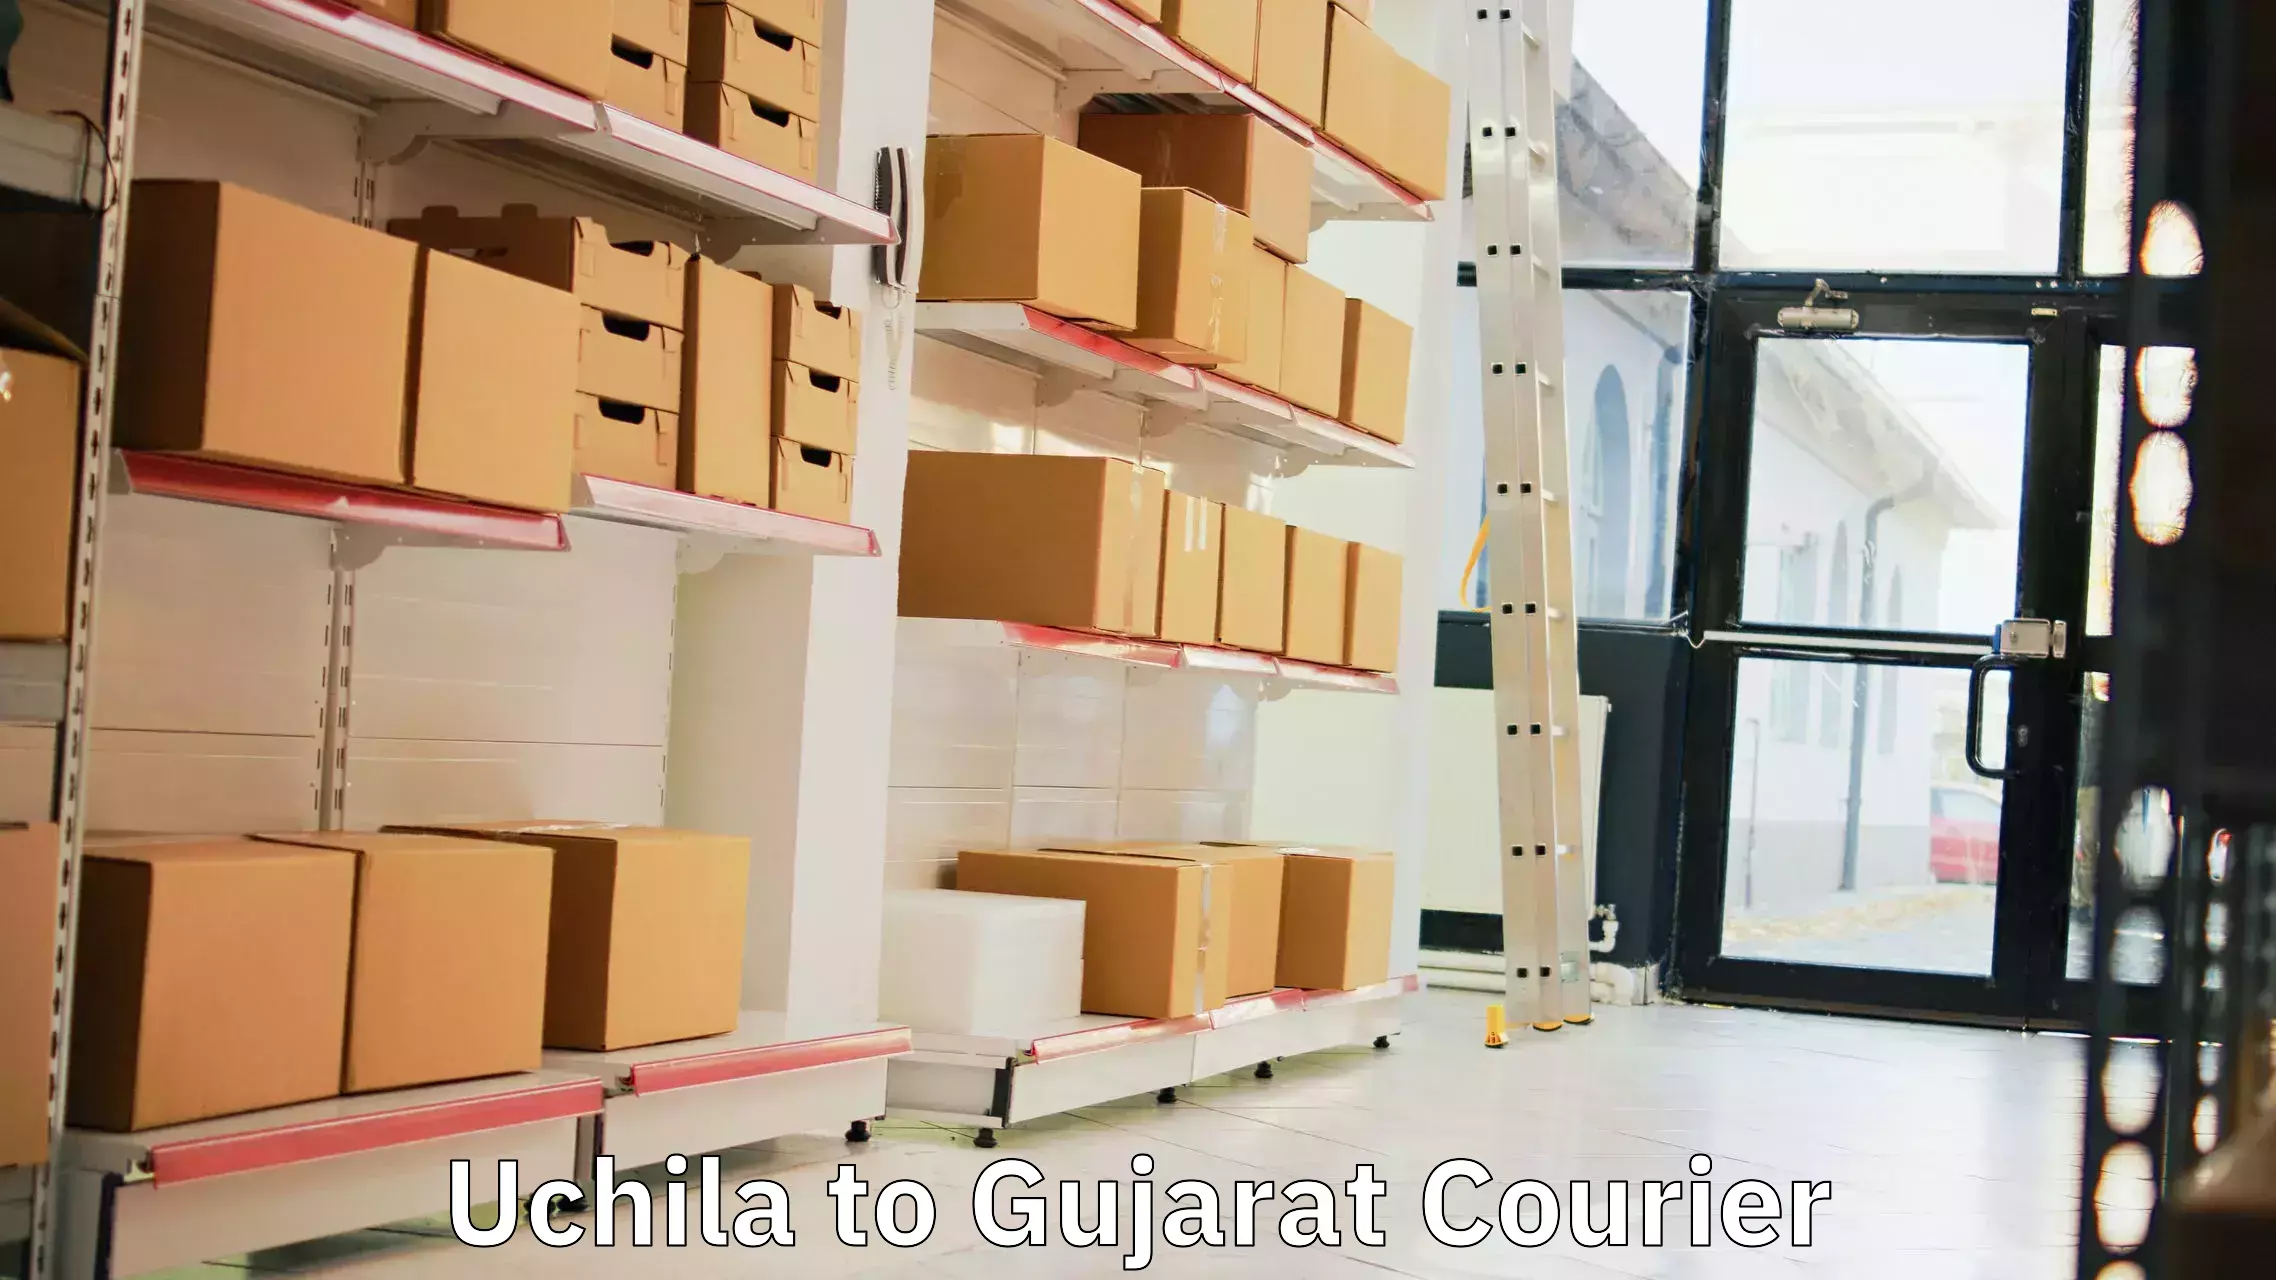 Air courier services Uchila to Ahmedabad